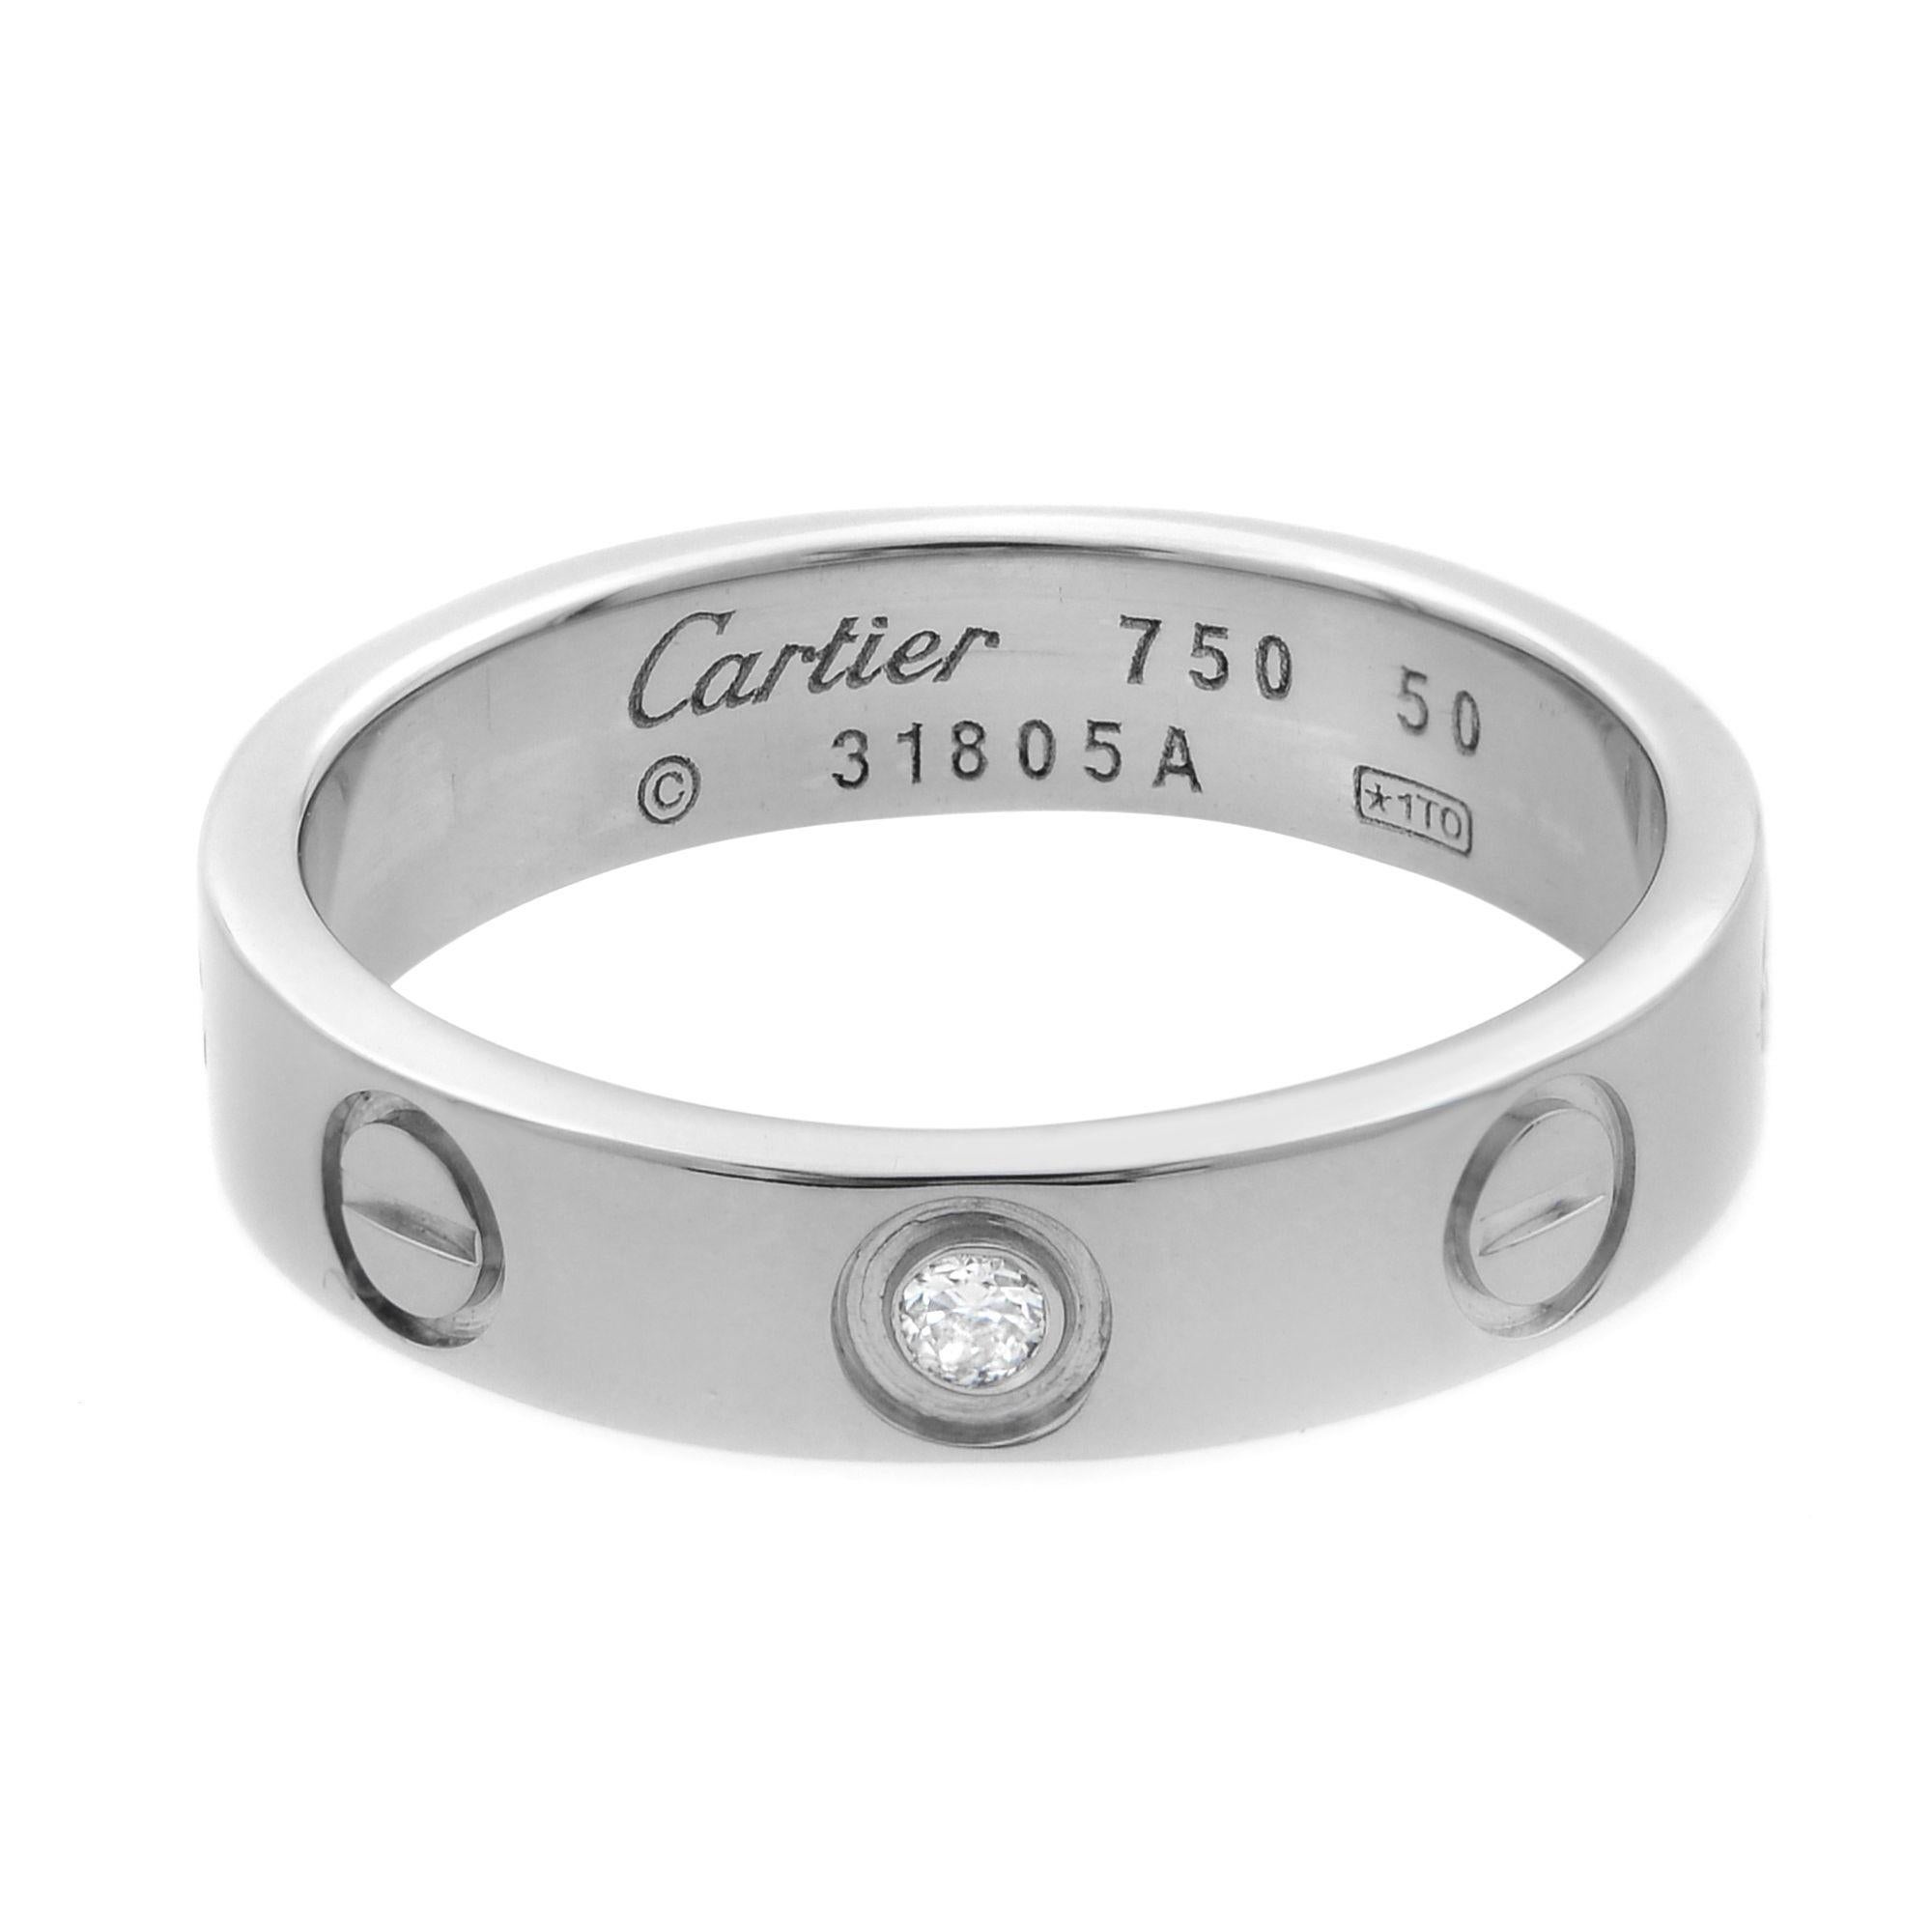 Cartier Love wedding band, 18K white gold, set with 1 brilliant-cut diamond totaling 0.02 carats. Width: 4mm. Size 50 US 5.5. Excellent pre-owned condition, original box and papers are not included.